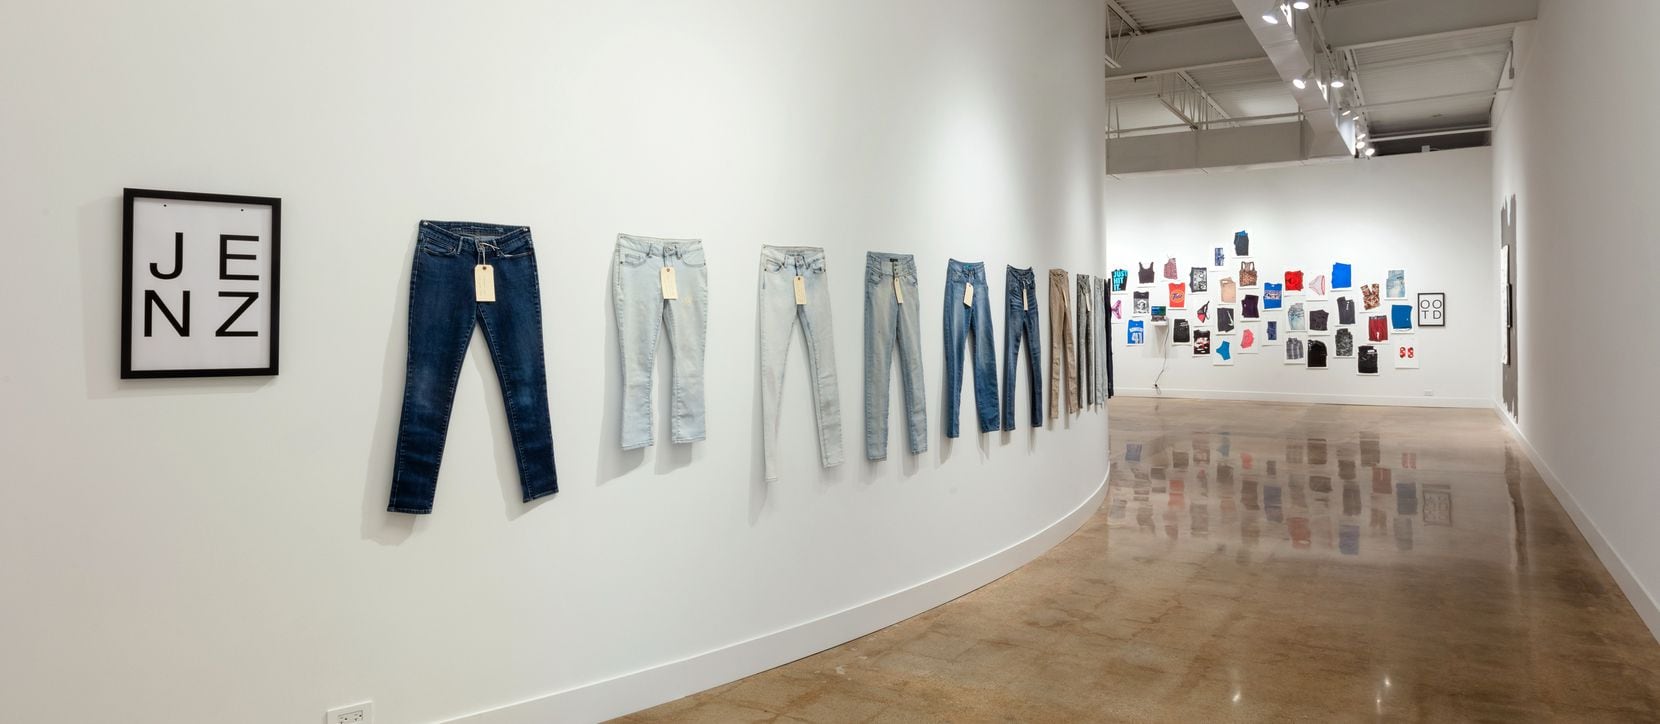 In Kathy Lovas' exhibition, the gallery’s walls are lined with hyper-realistic imagery, installation, paint and pieces of clothing, including prom dresses, blue jeans and women’s underwear.